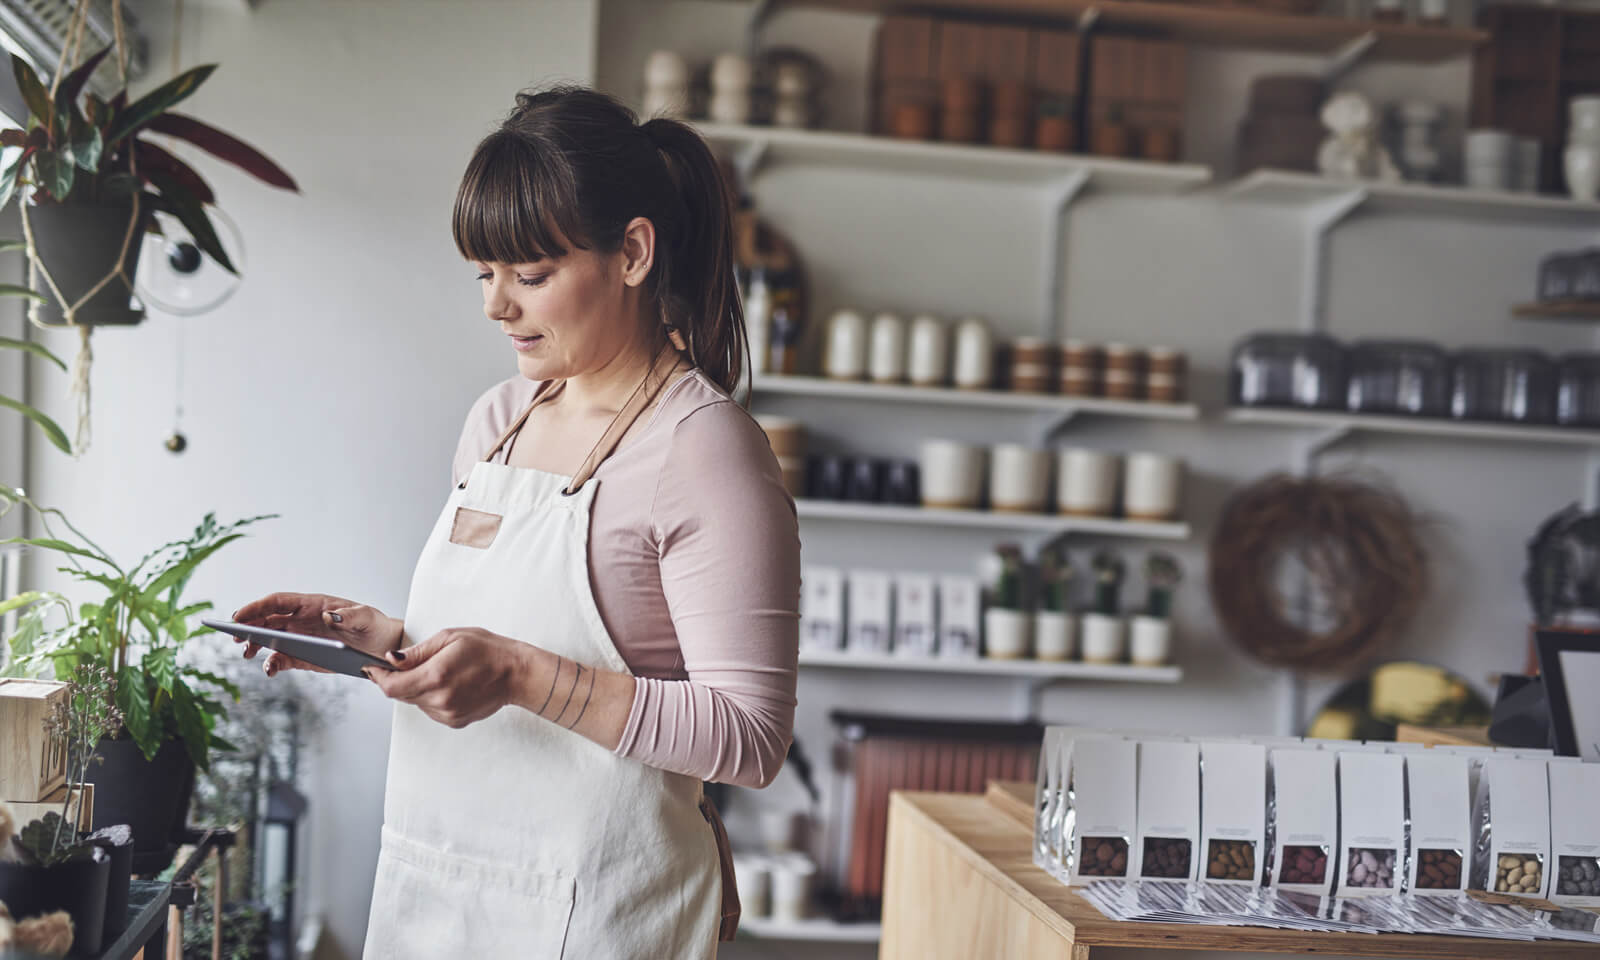 How to Build an Ecommerce Store for Your Brick and Mortar